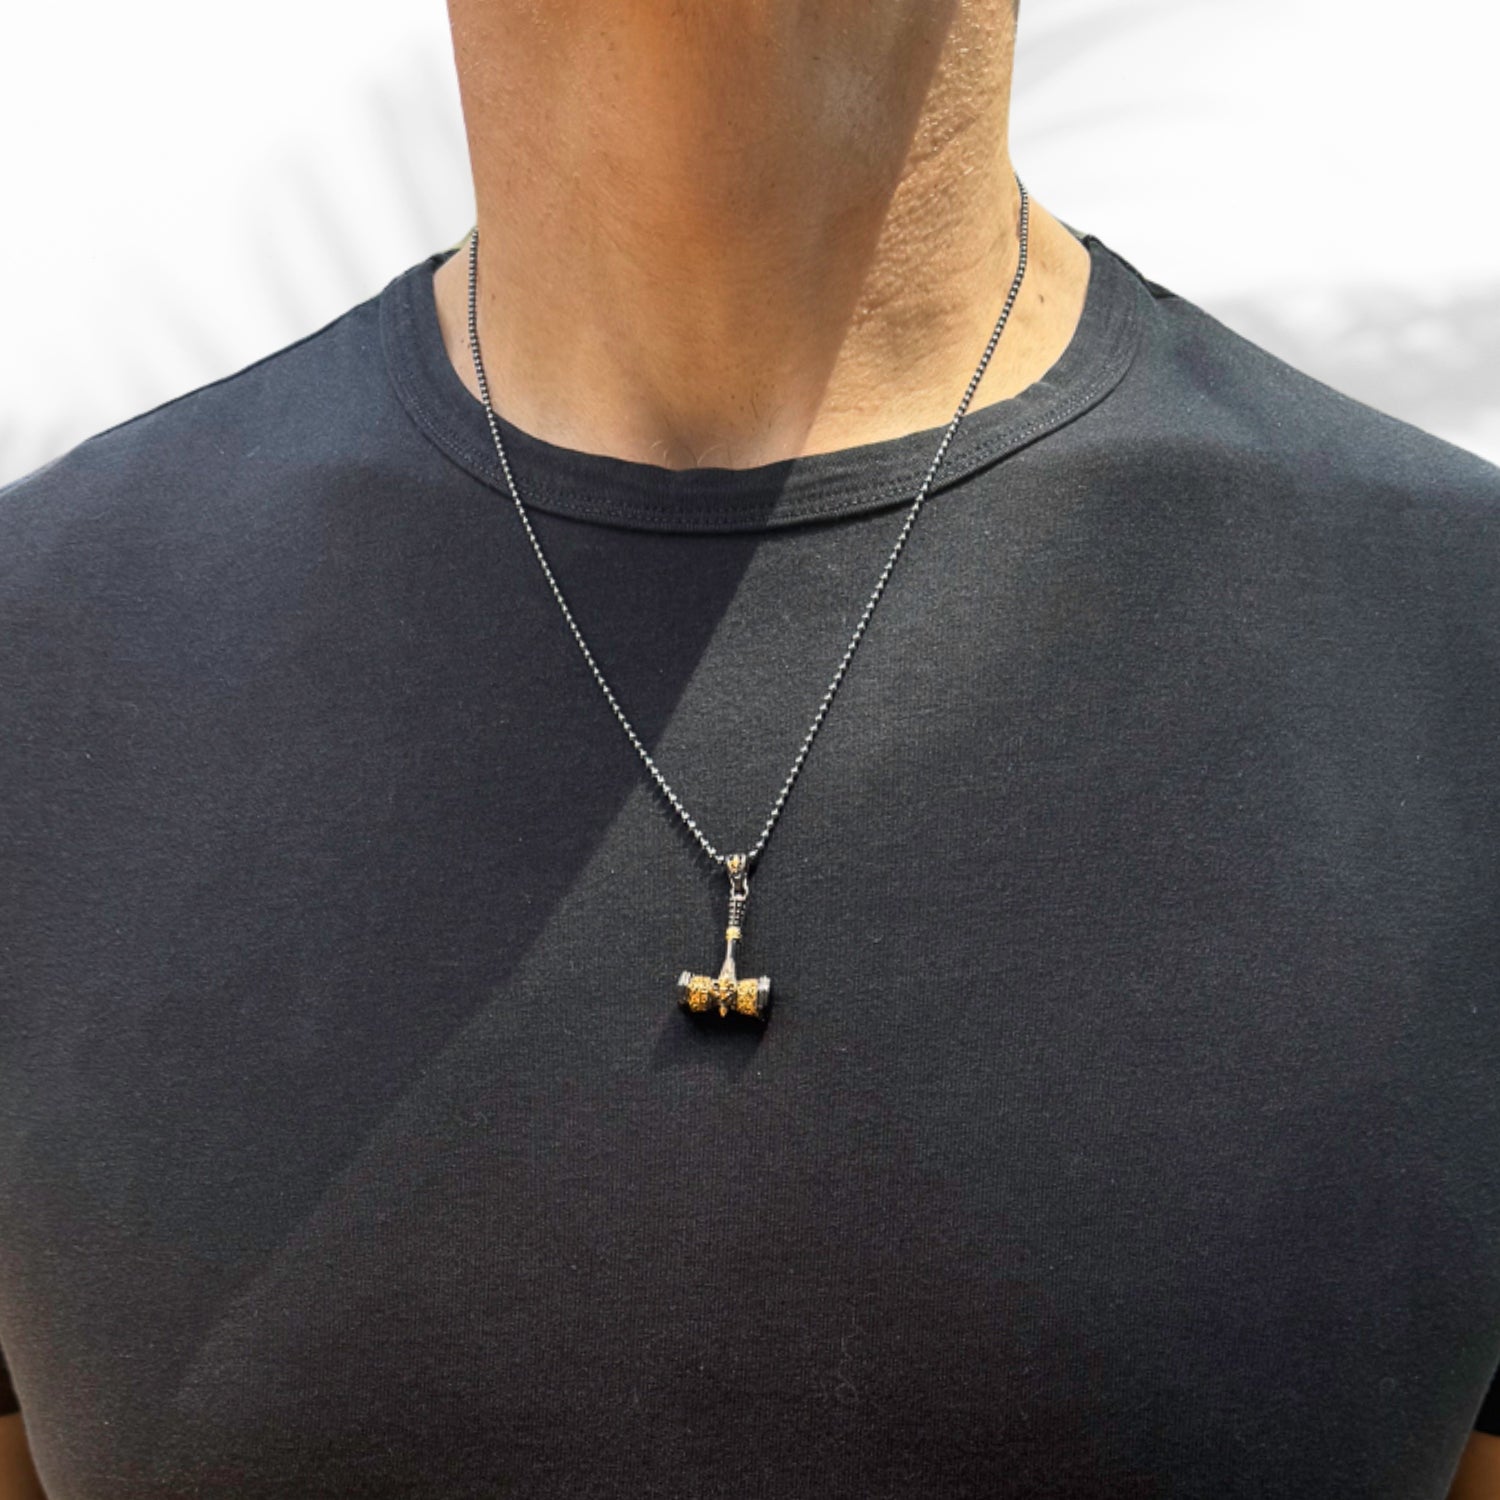 Handcrafted men's necklace with a sterling silver chain and a gold-plated hammer pendant adorned with a fleur de lis symbol